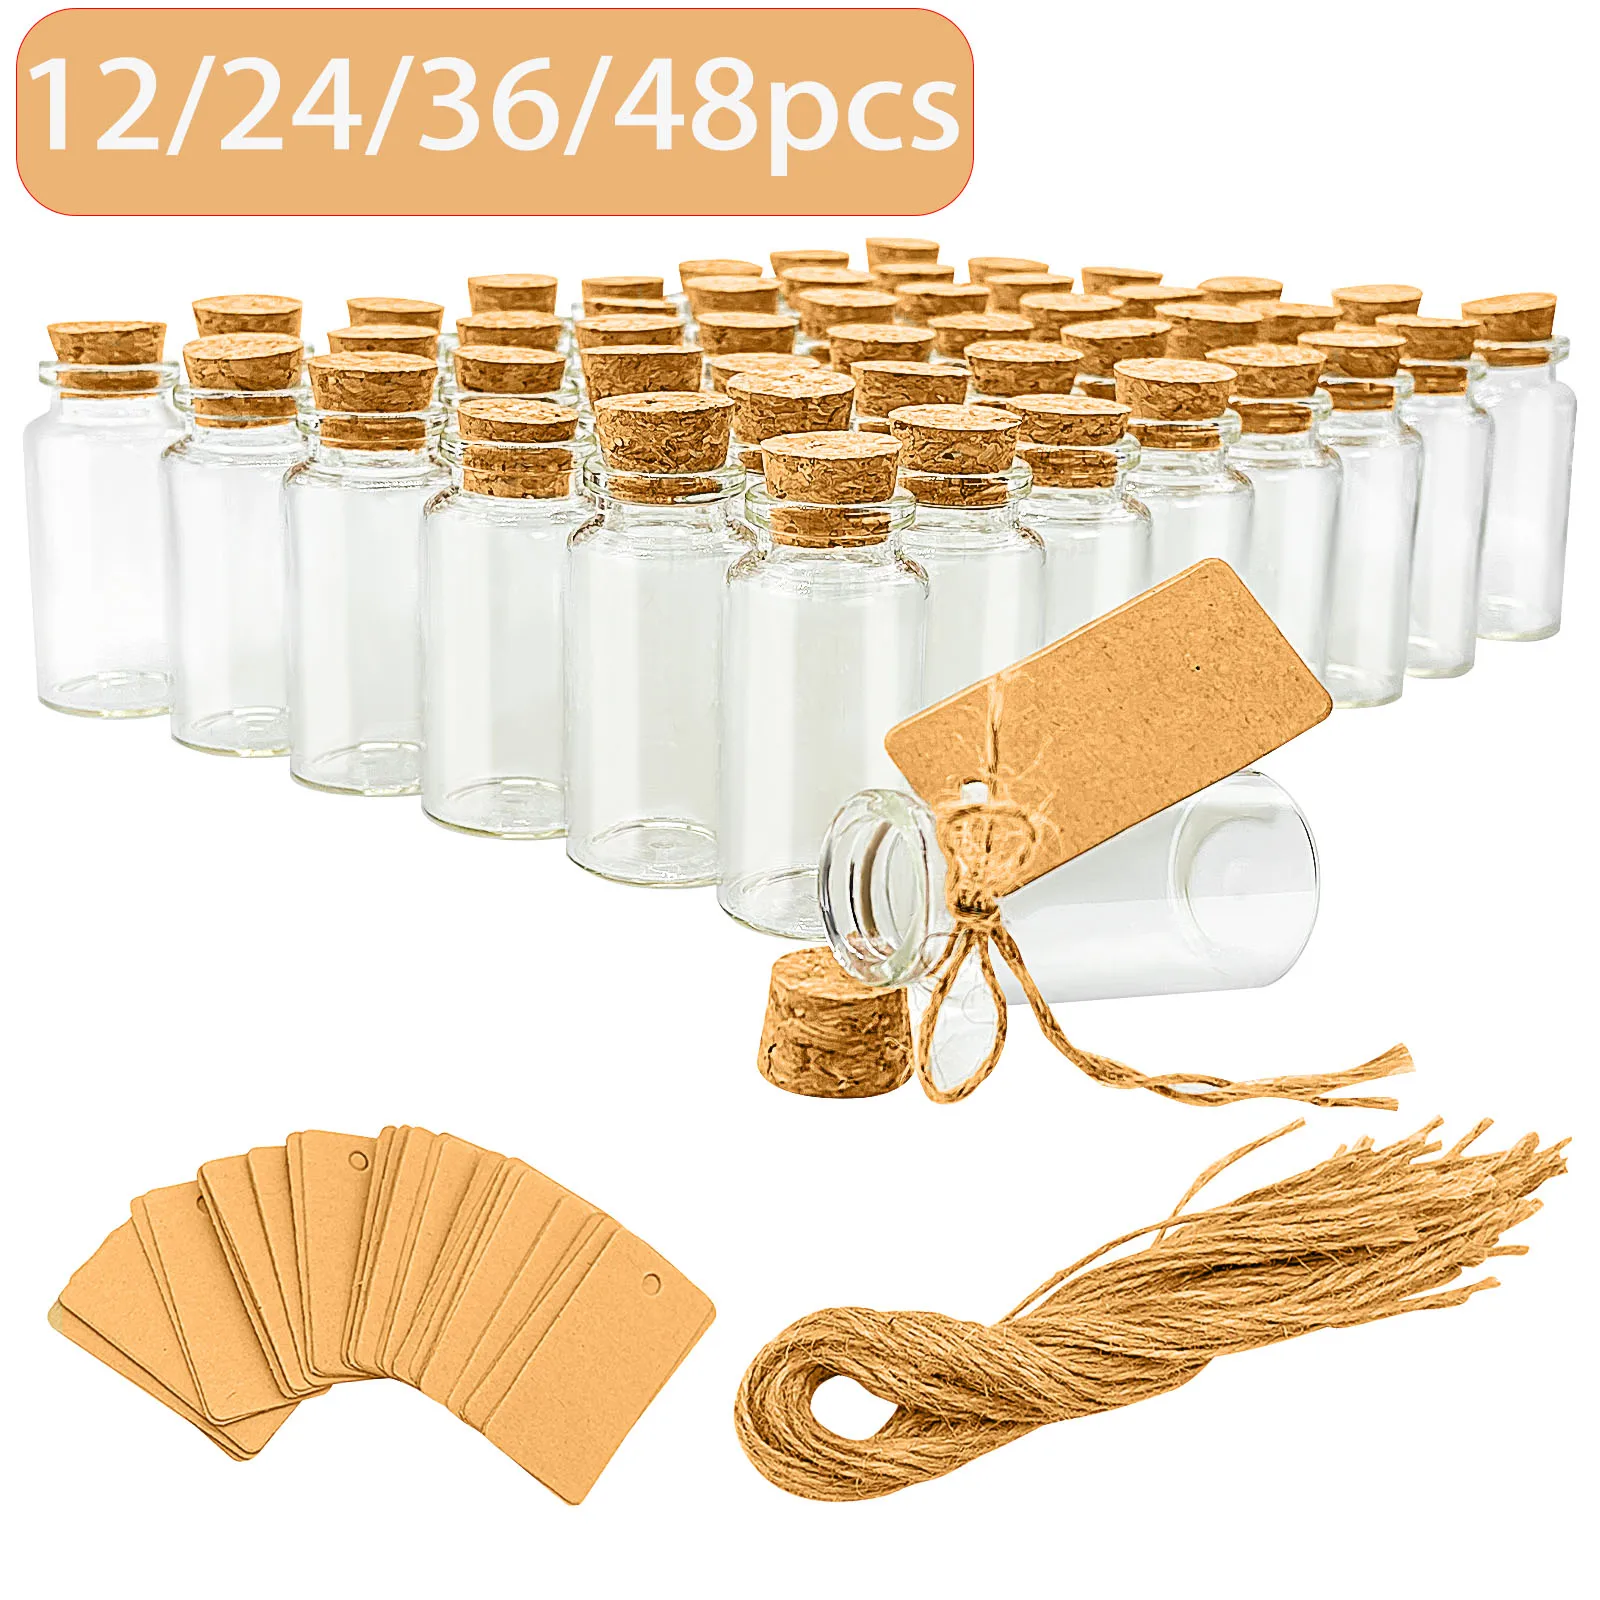 25ML Small Glass Bottles with Cork DIY Clear Wish Bottle Mini Glass Vials Hanging Decoration for Wedding Party Favors